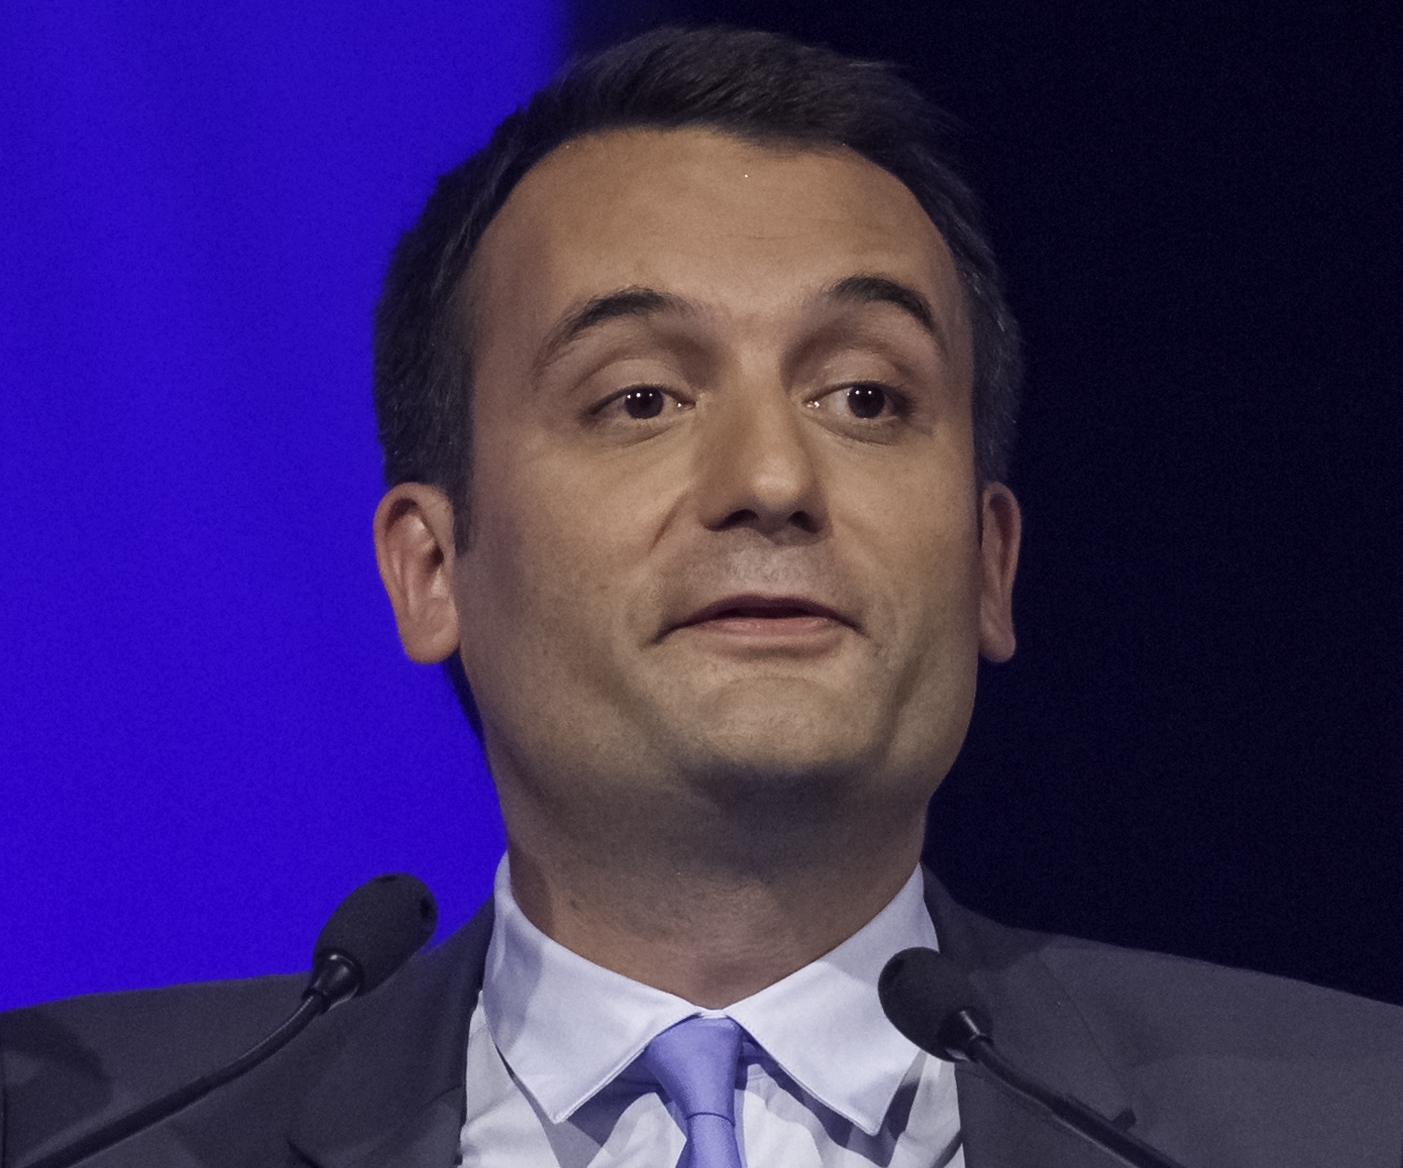 Florian Philippot — Crédits : TV Patriotes / Flickr CC BY 2.0